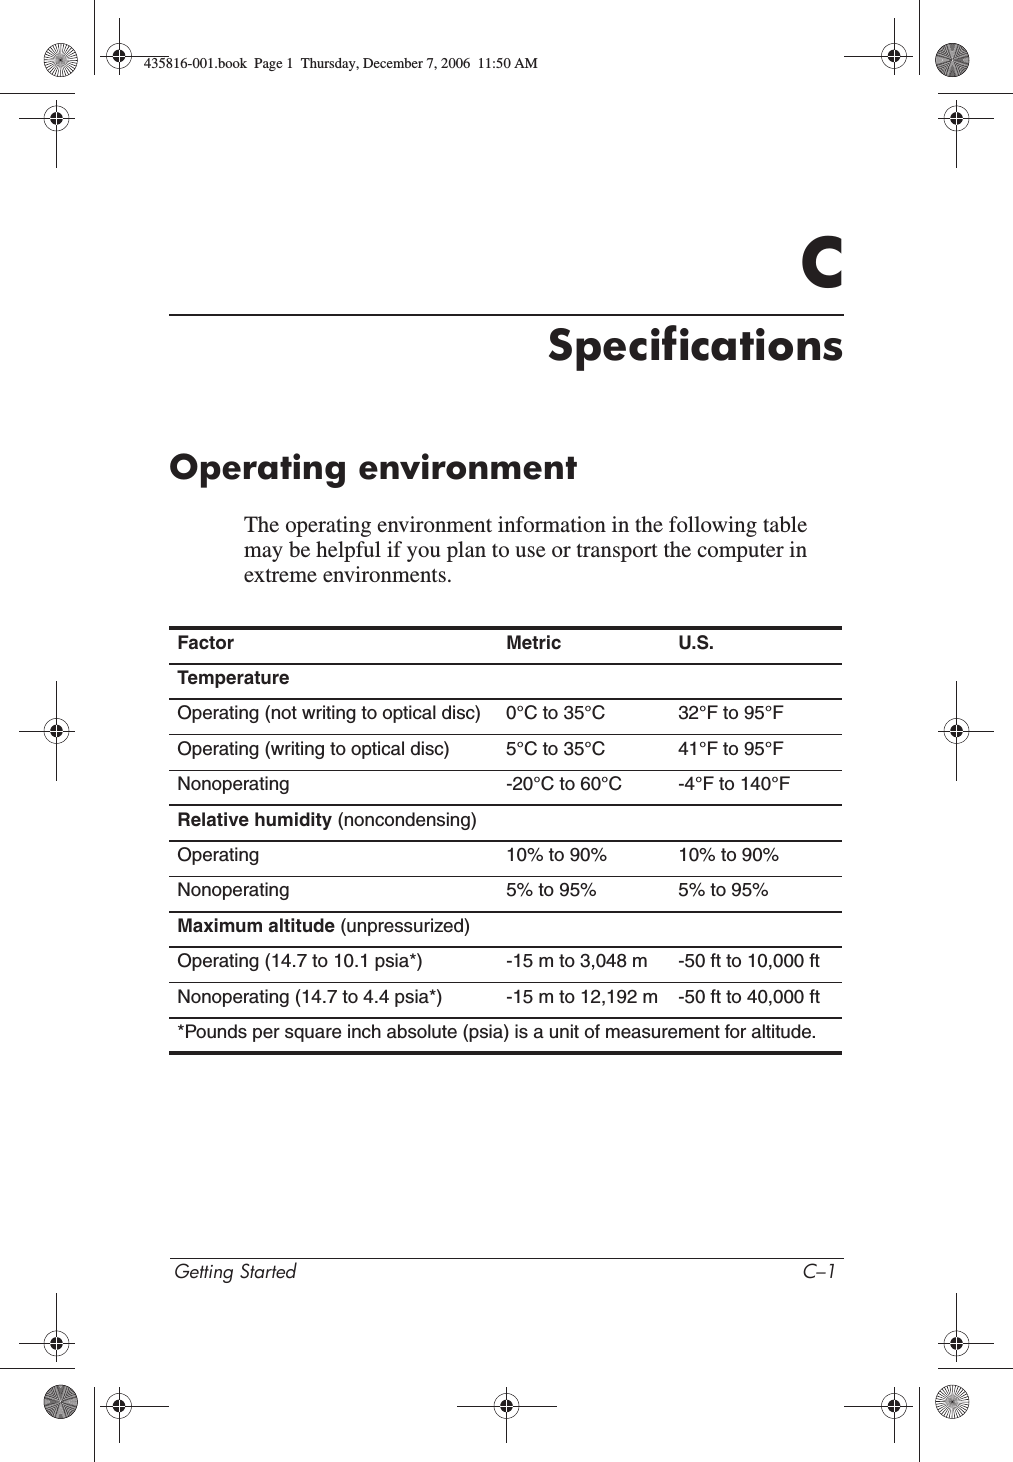 Getting Started C–1CSpecificationsOperating environmentThe operating environment information in the following table may be helpful if you plan to use or transport the computer in extreme environments.Factor Metric U.S.TemperatureOperating (not writing to optical disc) 0°C to 35°C 32°F to 95°FOperating (writing to optical disc) 5°C to 35°C 41°F to 95°FNonoperating -20°C to 60°C -4°F to 140°FRelative humidity (noncondensing)Operating 10% to 90% 10% to 90%Nonoperating 5% to 95% 5% to 95%Maximum altitude (unpressurized)Operating (14.7 to 10.1 psia*) -15 m to 3,048 m -50 ft to 10,000 ftNonoperating (14.7 to 4.4 psia*) -15 m to 12,192 m -50 ft to 40,000 ft*Pounds per square inch absolute (psia) is a unit of measurement for altitude.435816-001.book  Page 1  Thursday, December 7, 2006  11:50 AM